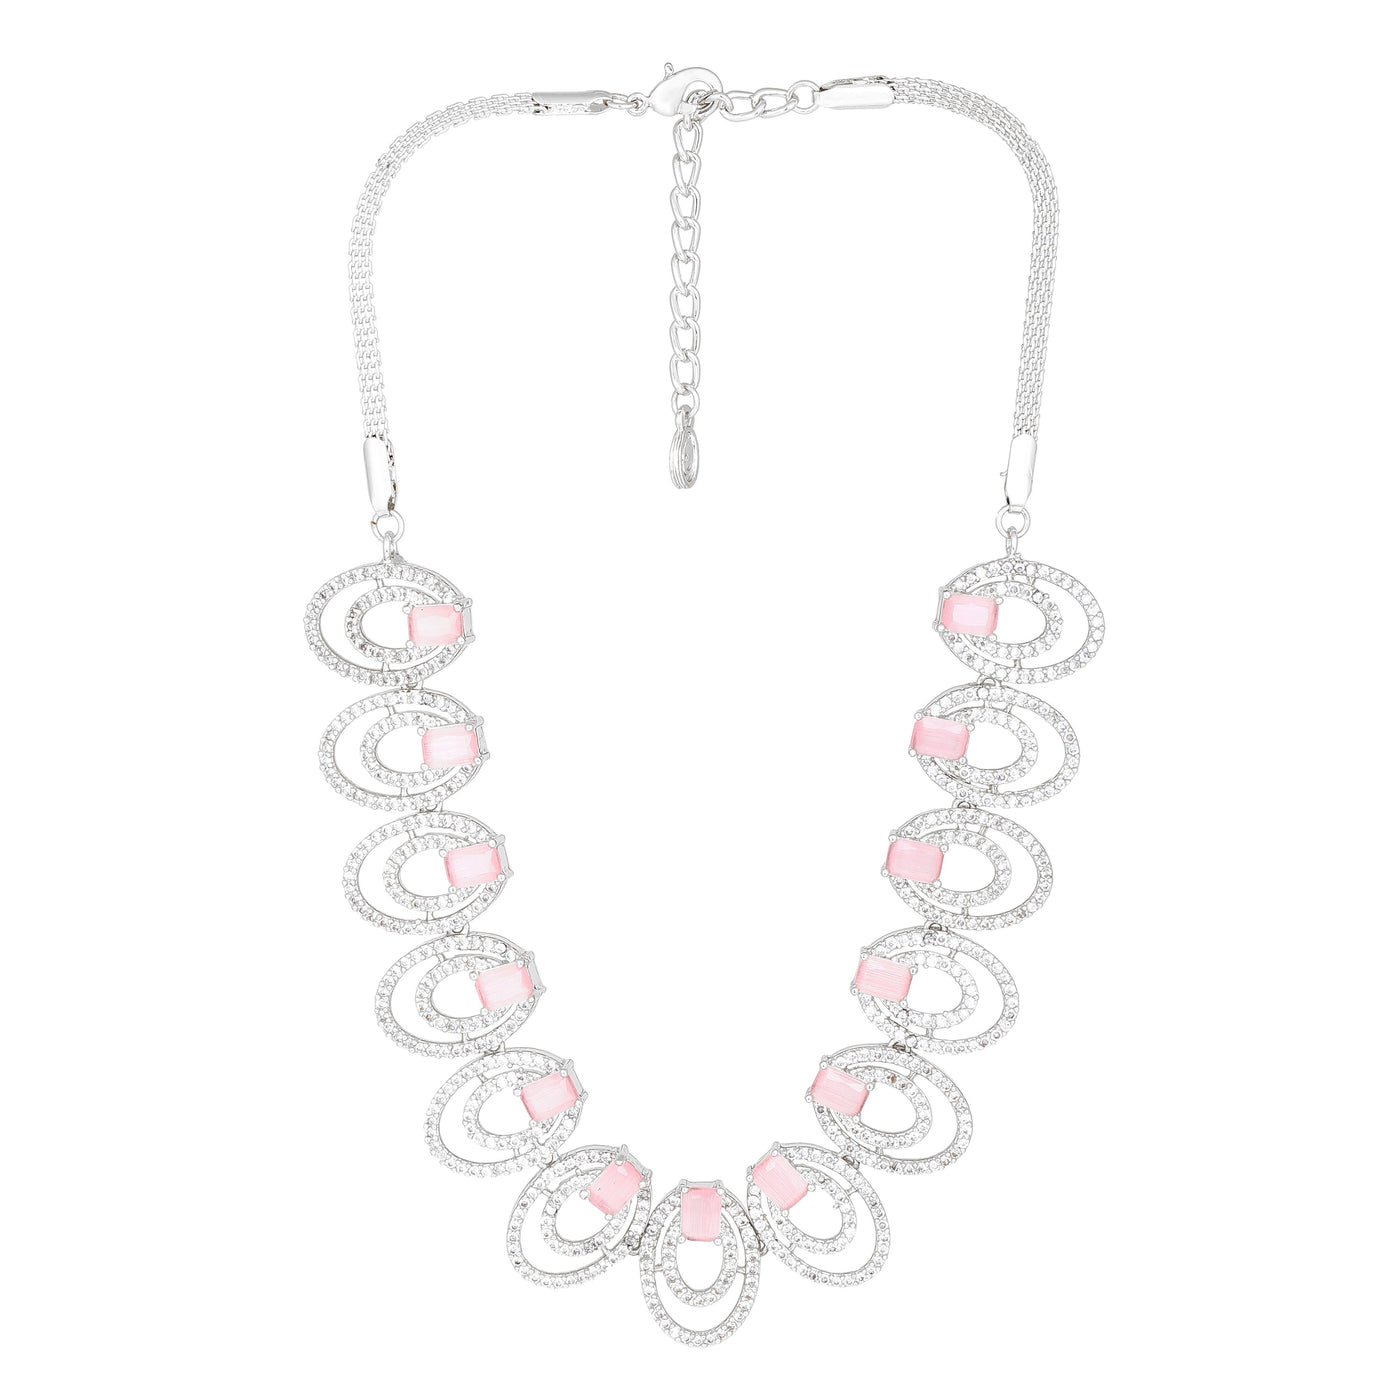 Estele Rhodium Plated CZ Circular Designer Necklace Set with Mint Pink Crystals for Women